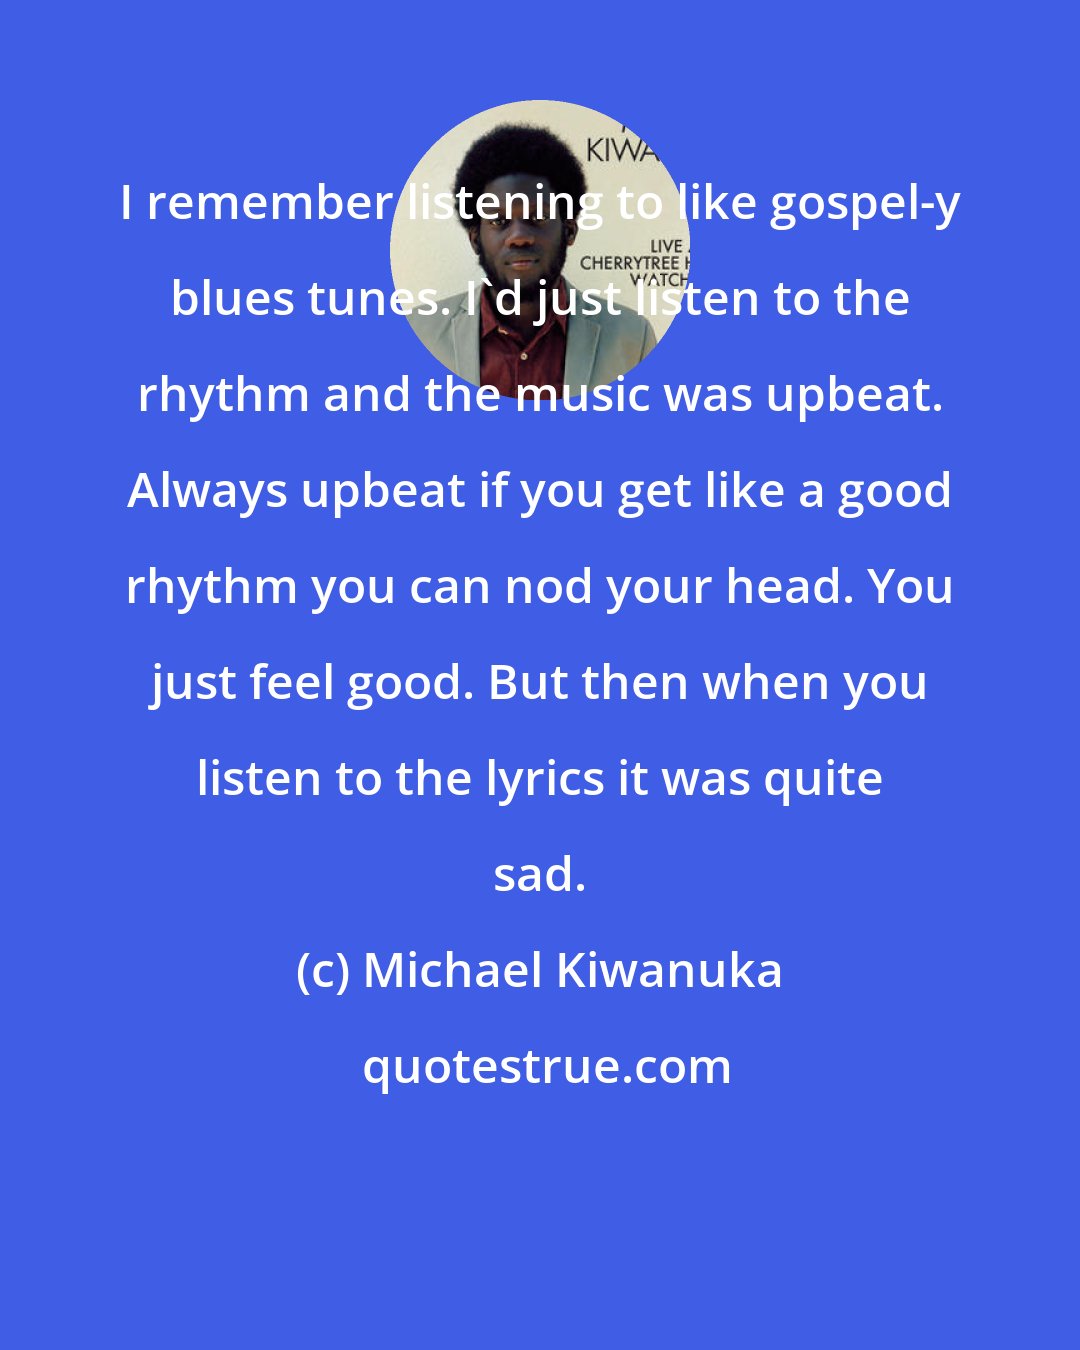 Michael Kiwanuka: I remember listening to like gospel-y blues tunes. I'd just listen to the rhythm and the music was upbeat. Always upbeat if you get like a good rhythm you can nod your head. You just feel good. But then when you listen to the lyrics it was quite sad.